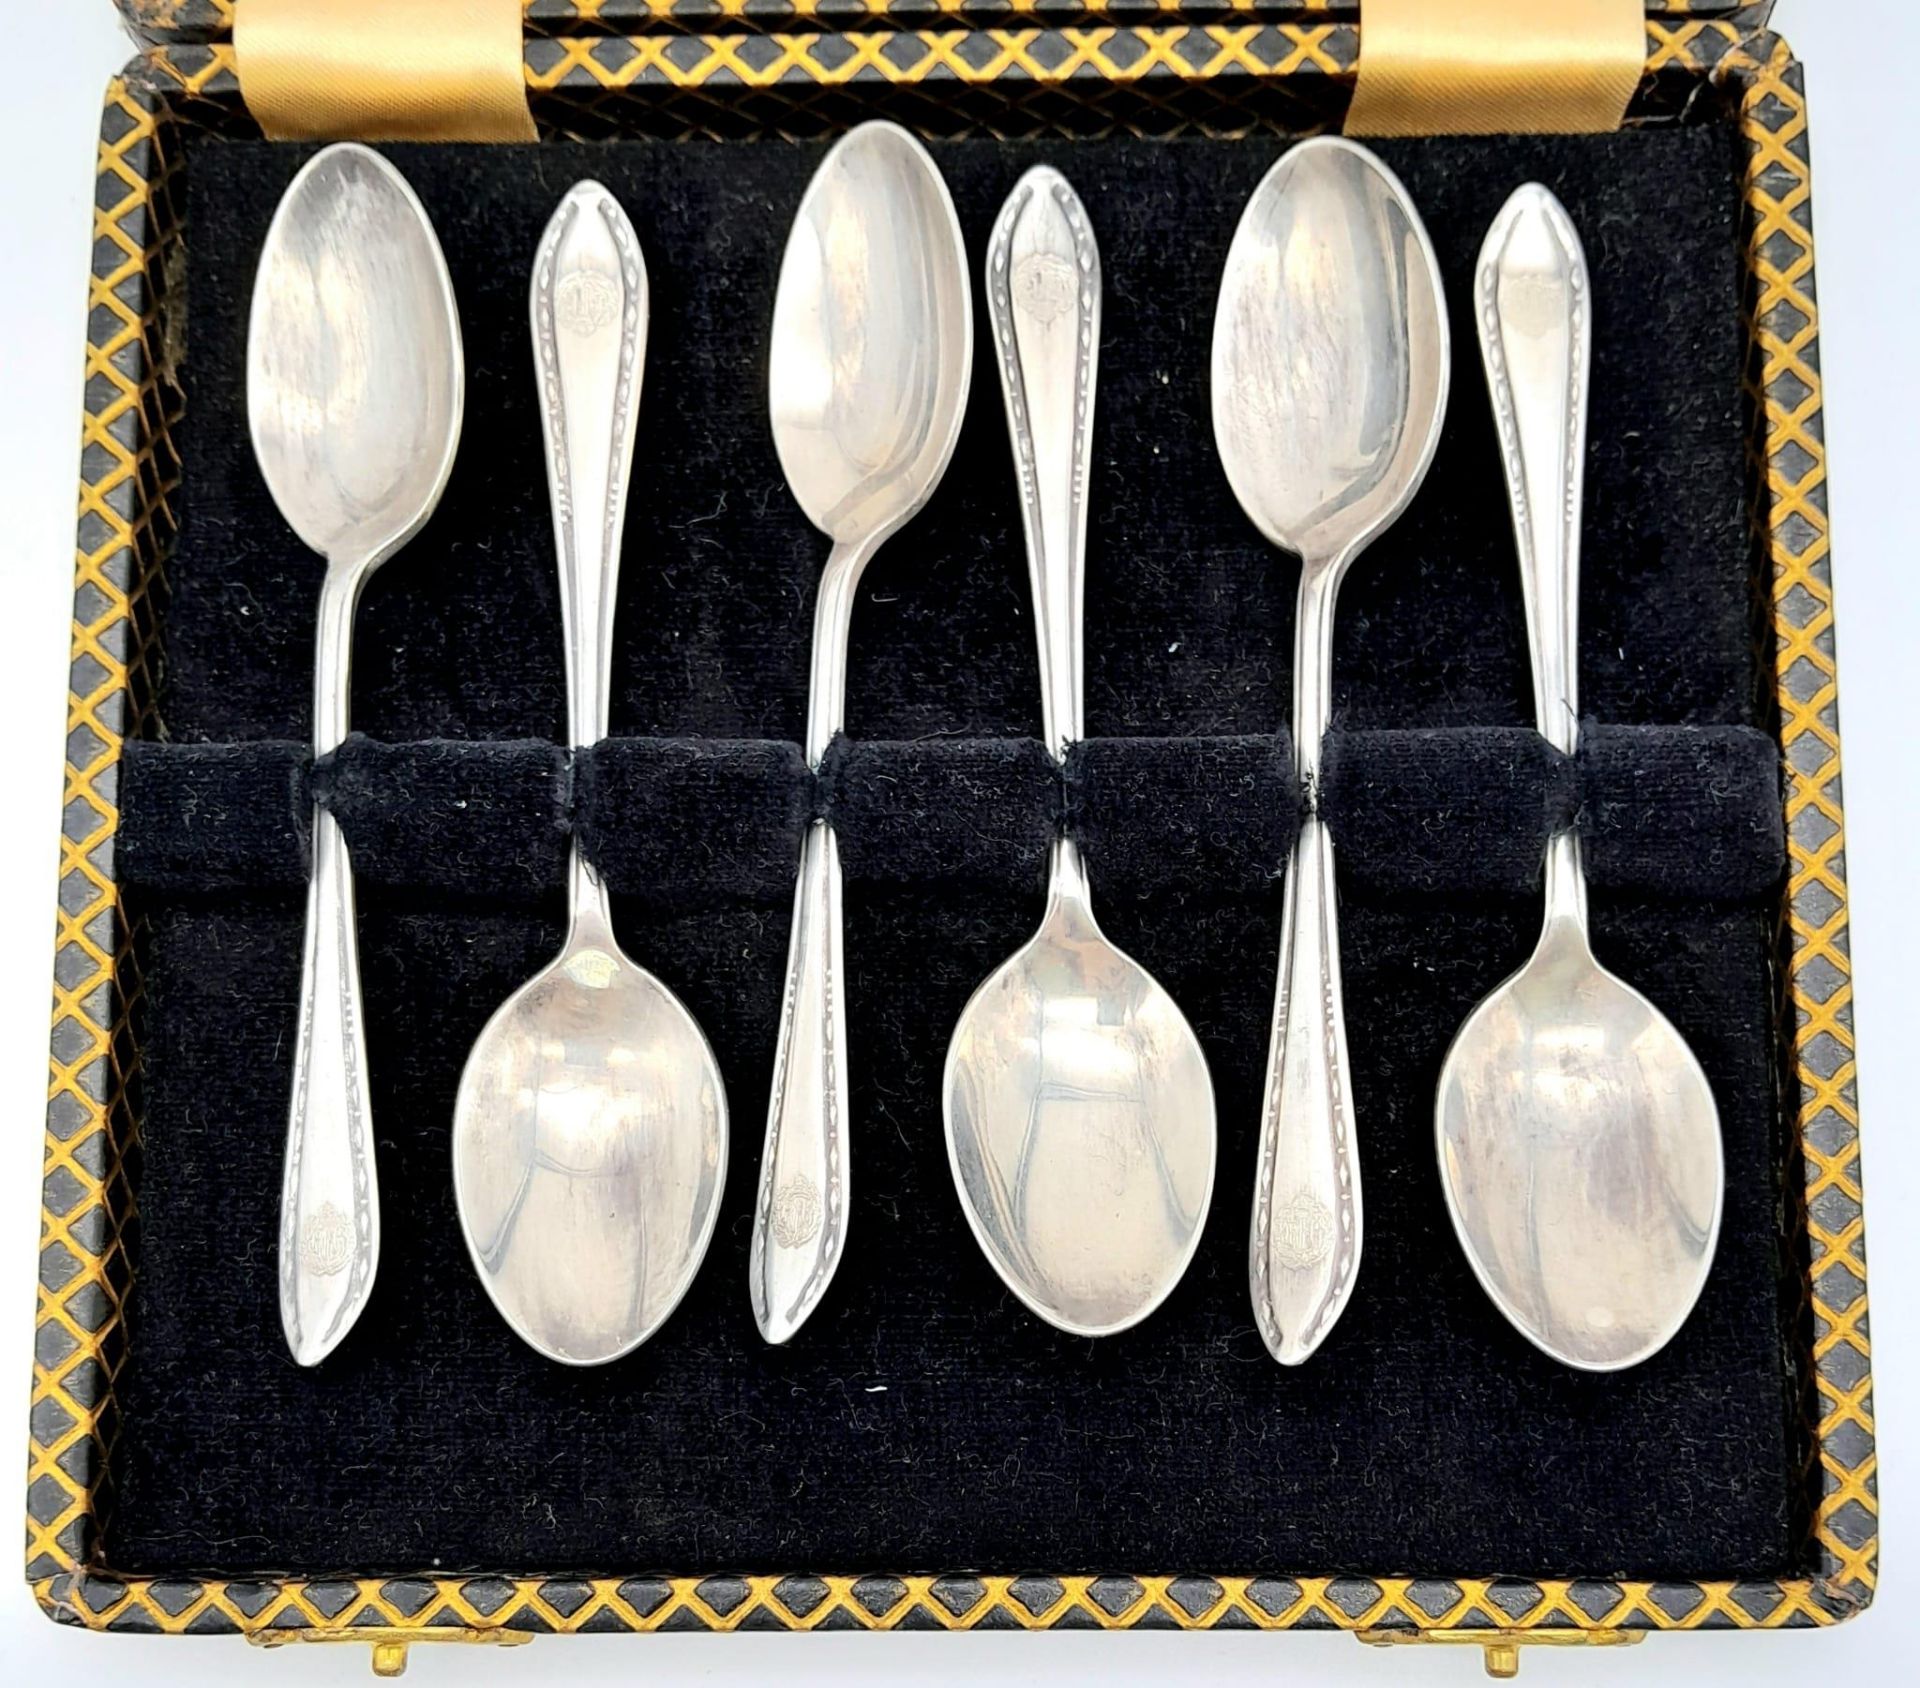 Set of 6 Royal Flying Corps Silver Plated Teaspoons in original case.